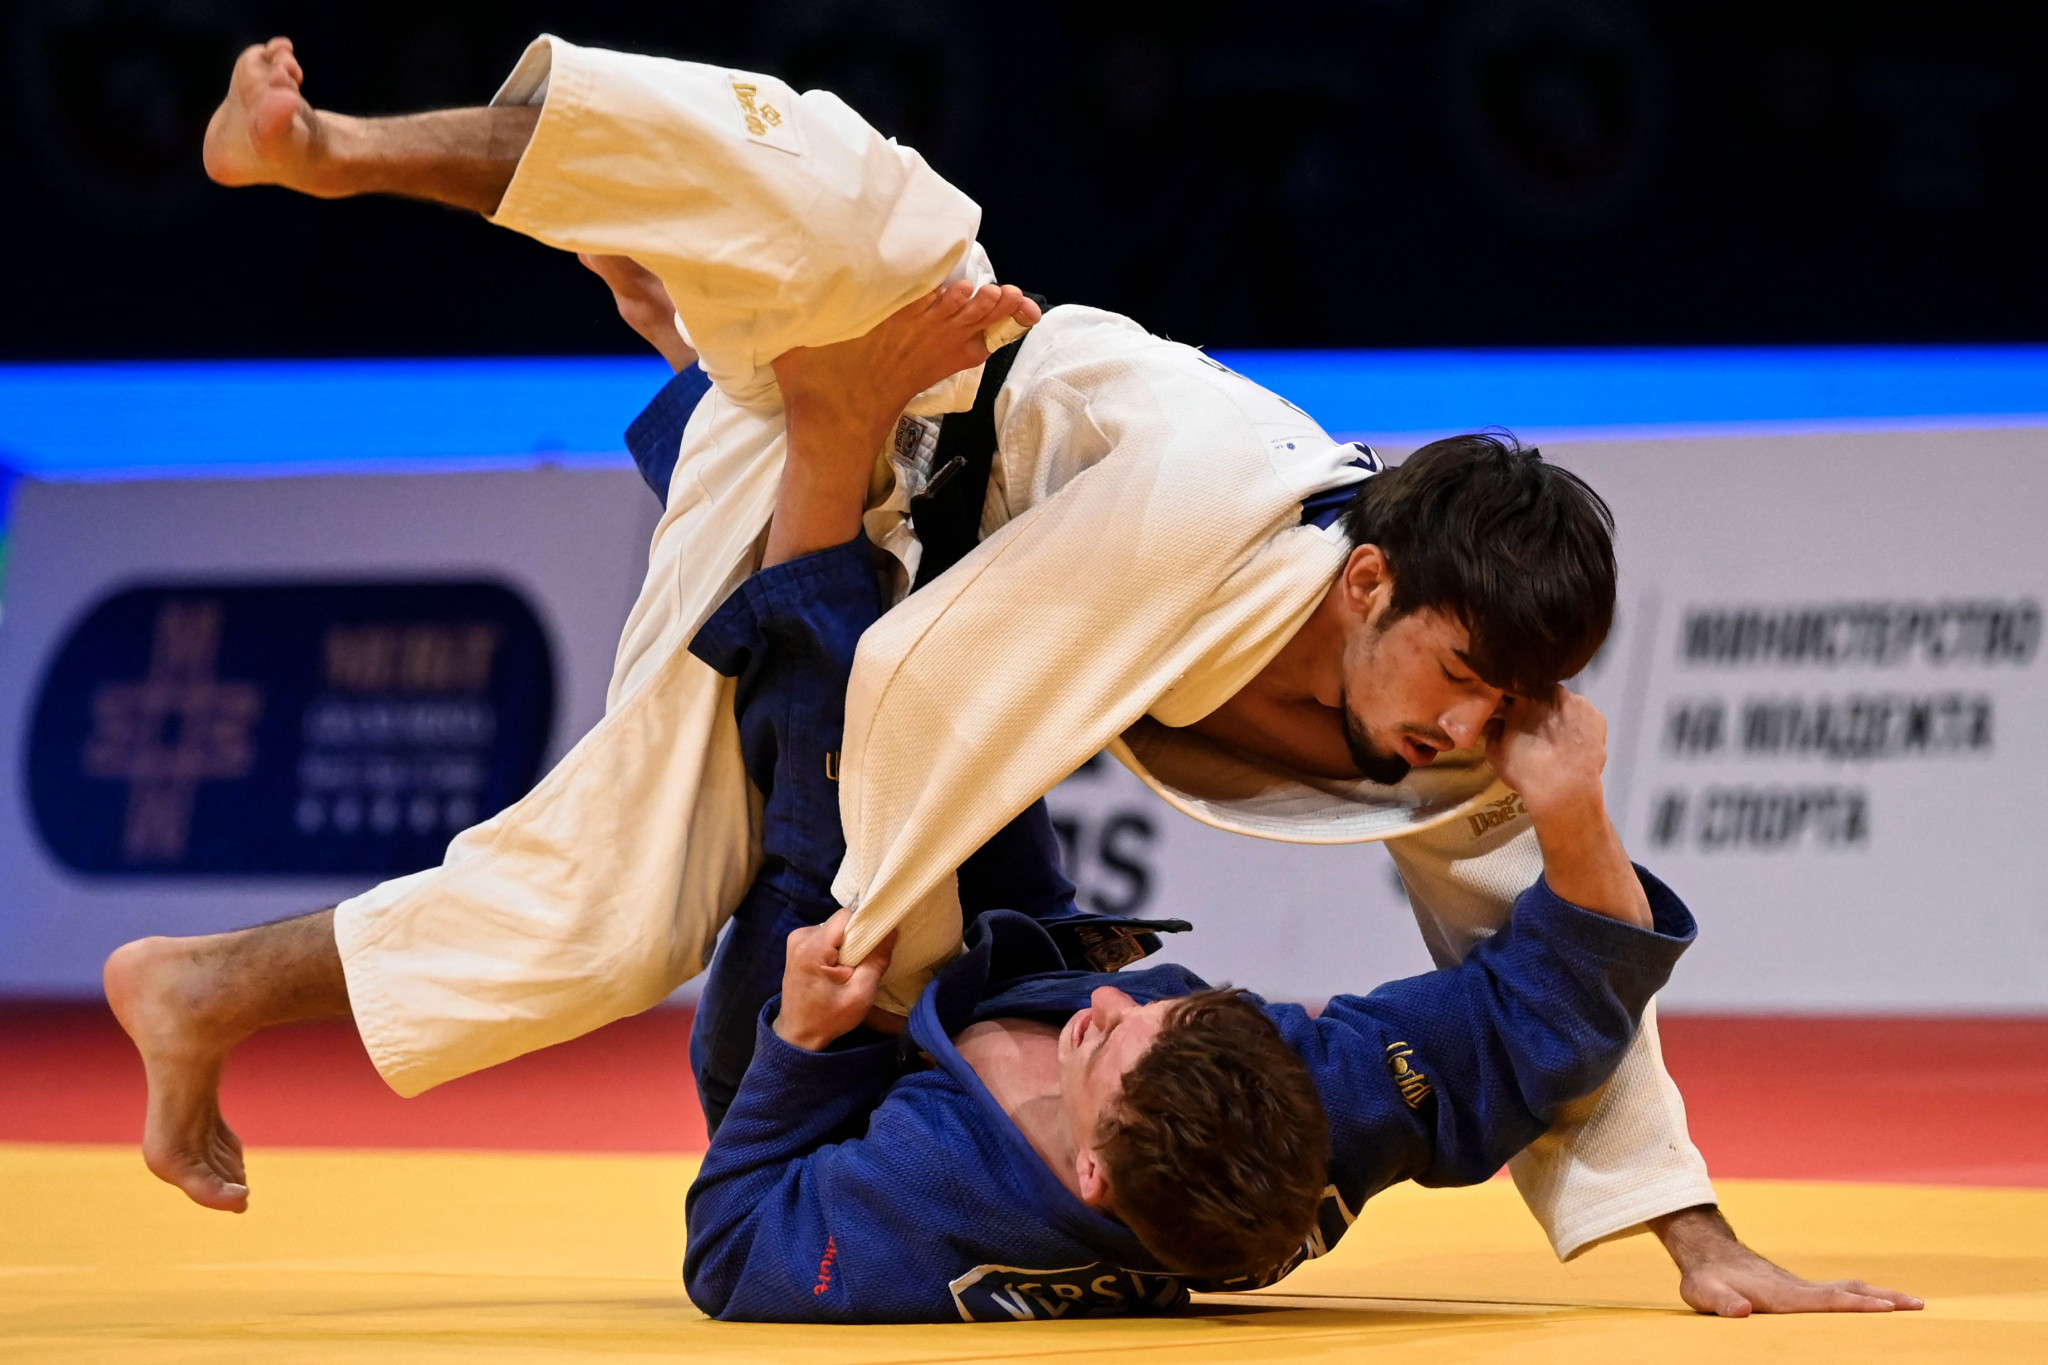 Balabay Aghayev won the men's under-60kg title today ©Getty Images